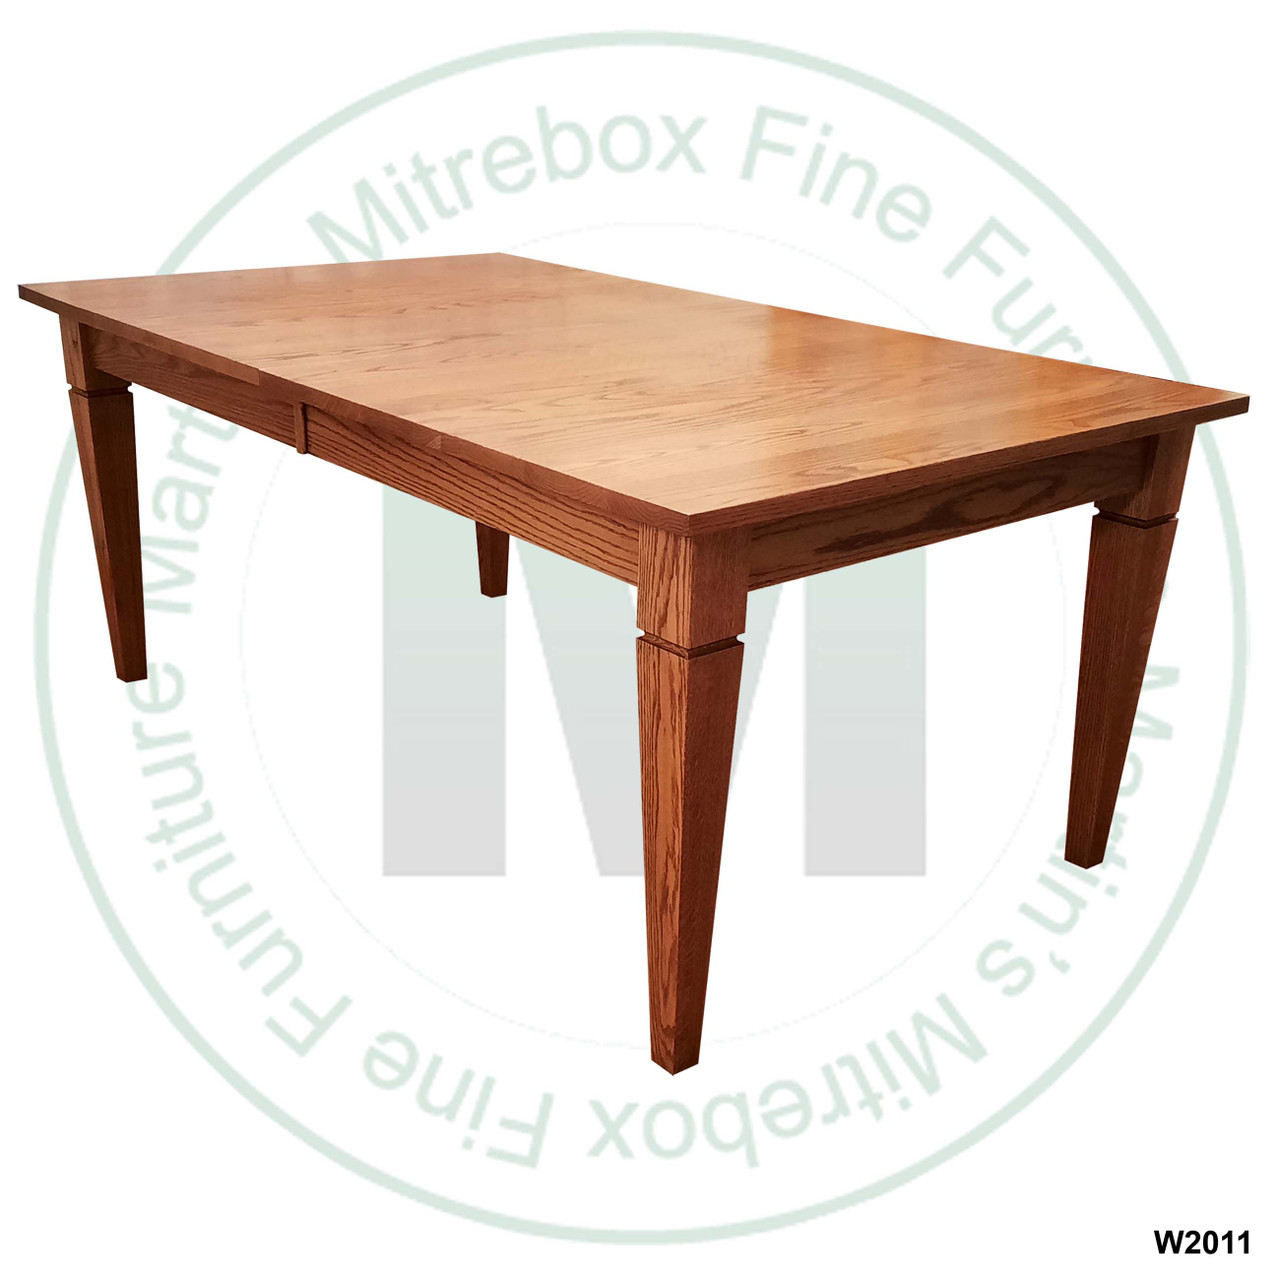 Oak Reesor Solid Top Harvest Table 36''D x 60''W x 30''H Table Has 1'' Thick Top